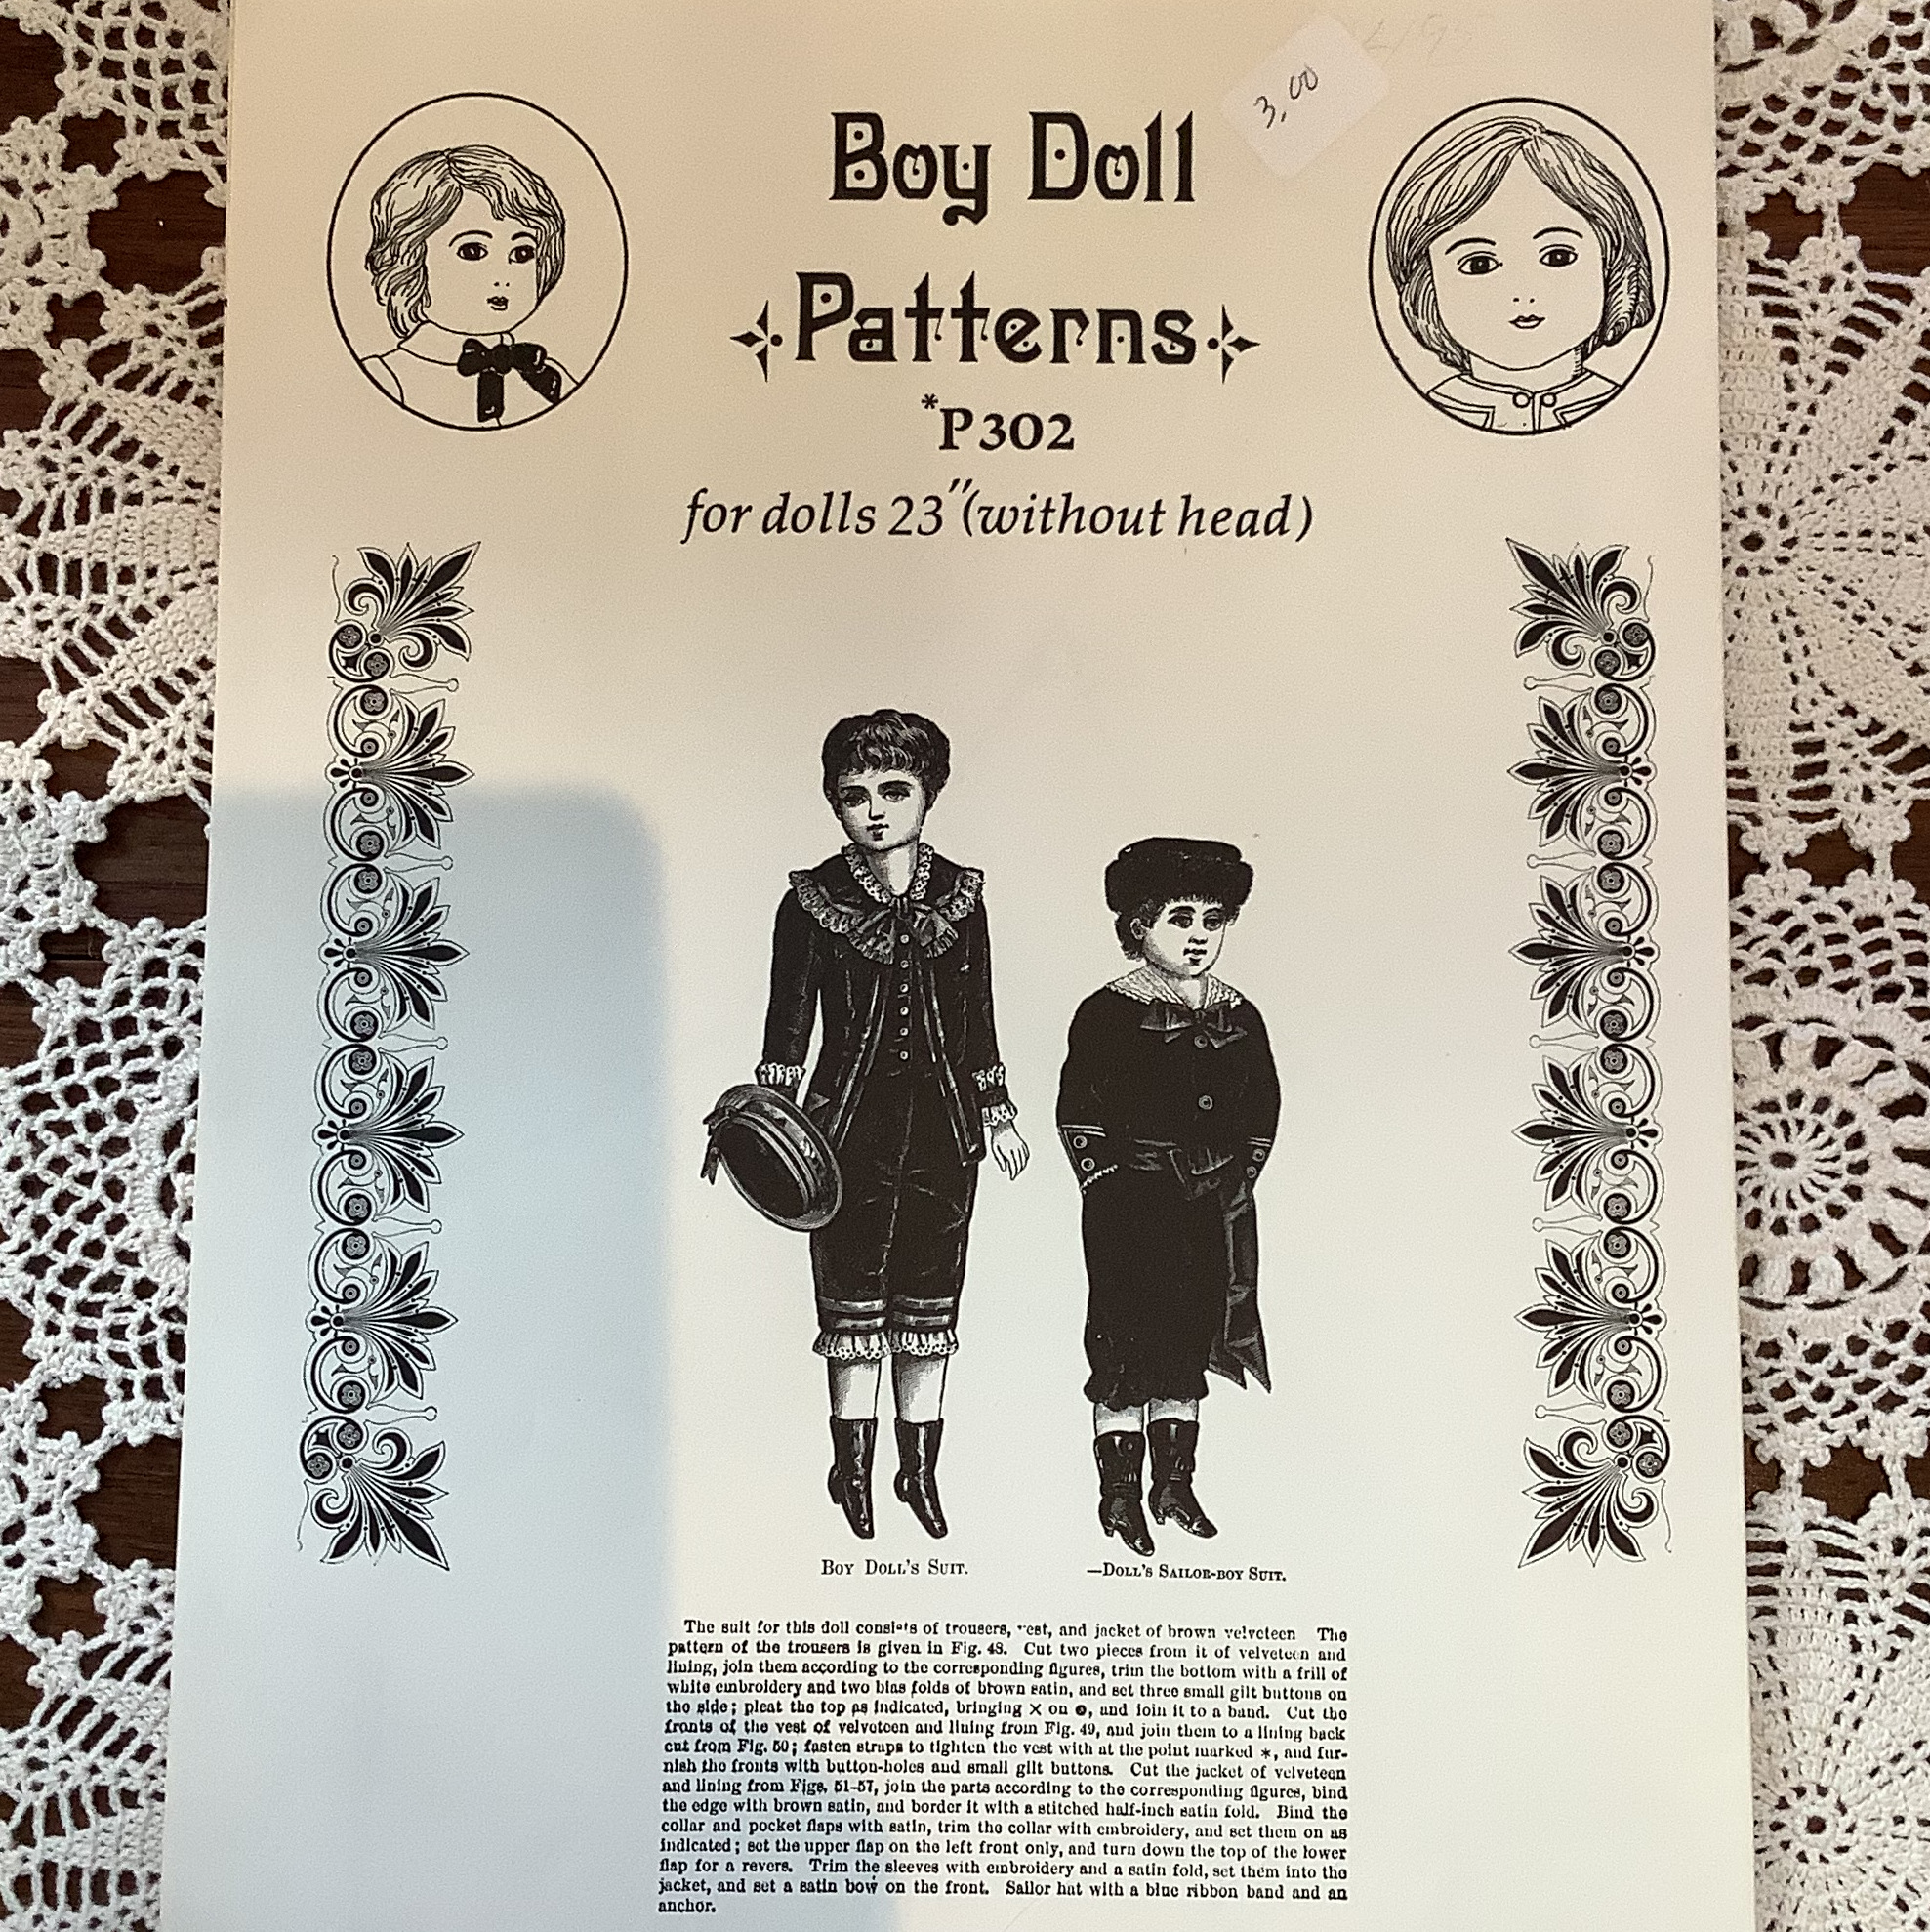 Sewing pattern to make two ornate suit patterns for child doll 23 inches at shoulder